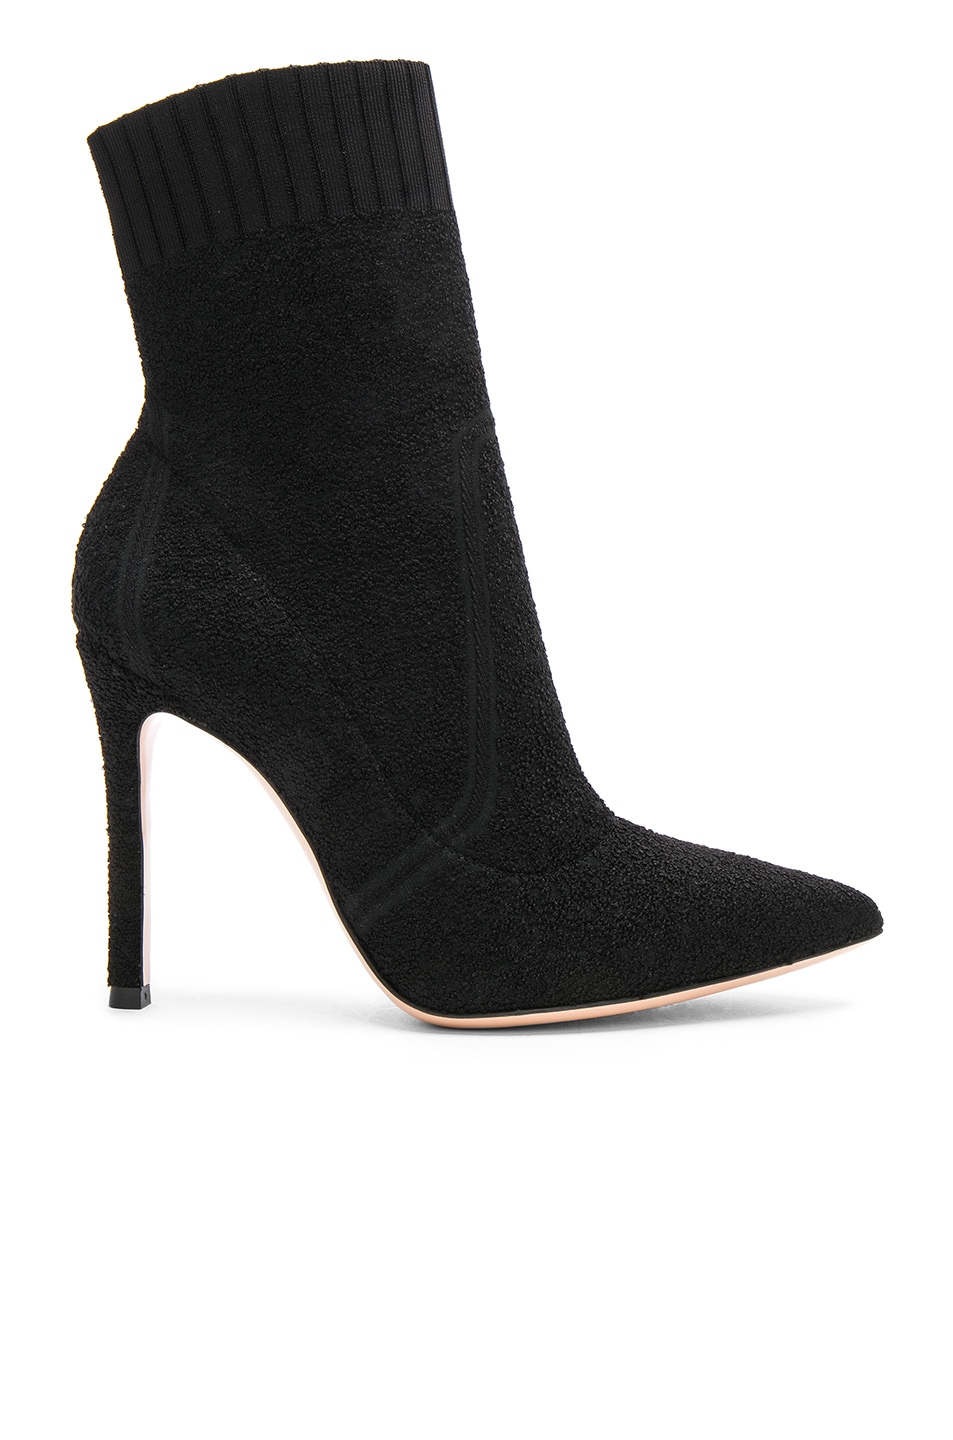 Image 1 of Gianvito Rossi Knit Boucle Katie Ankle Booties in Black